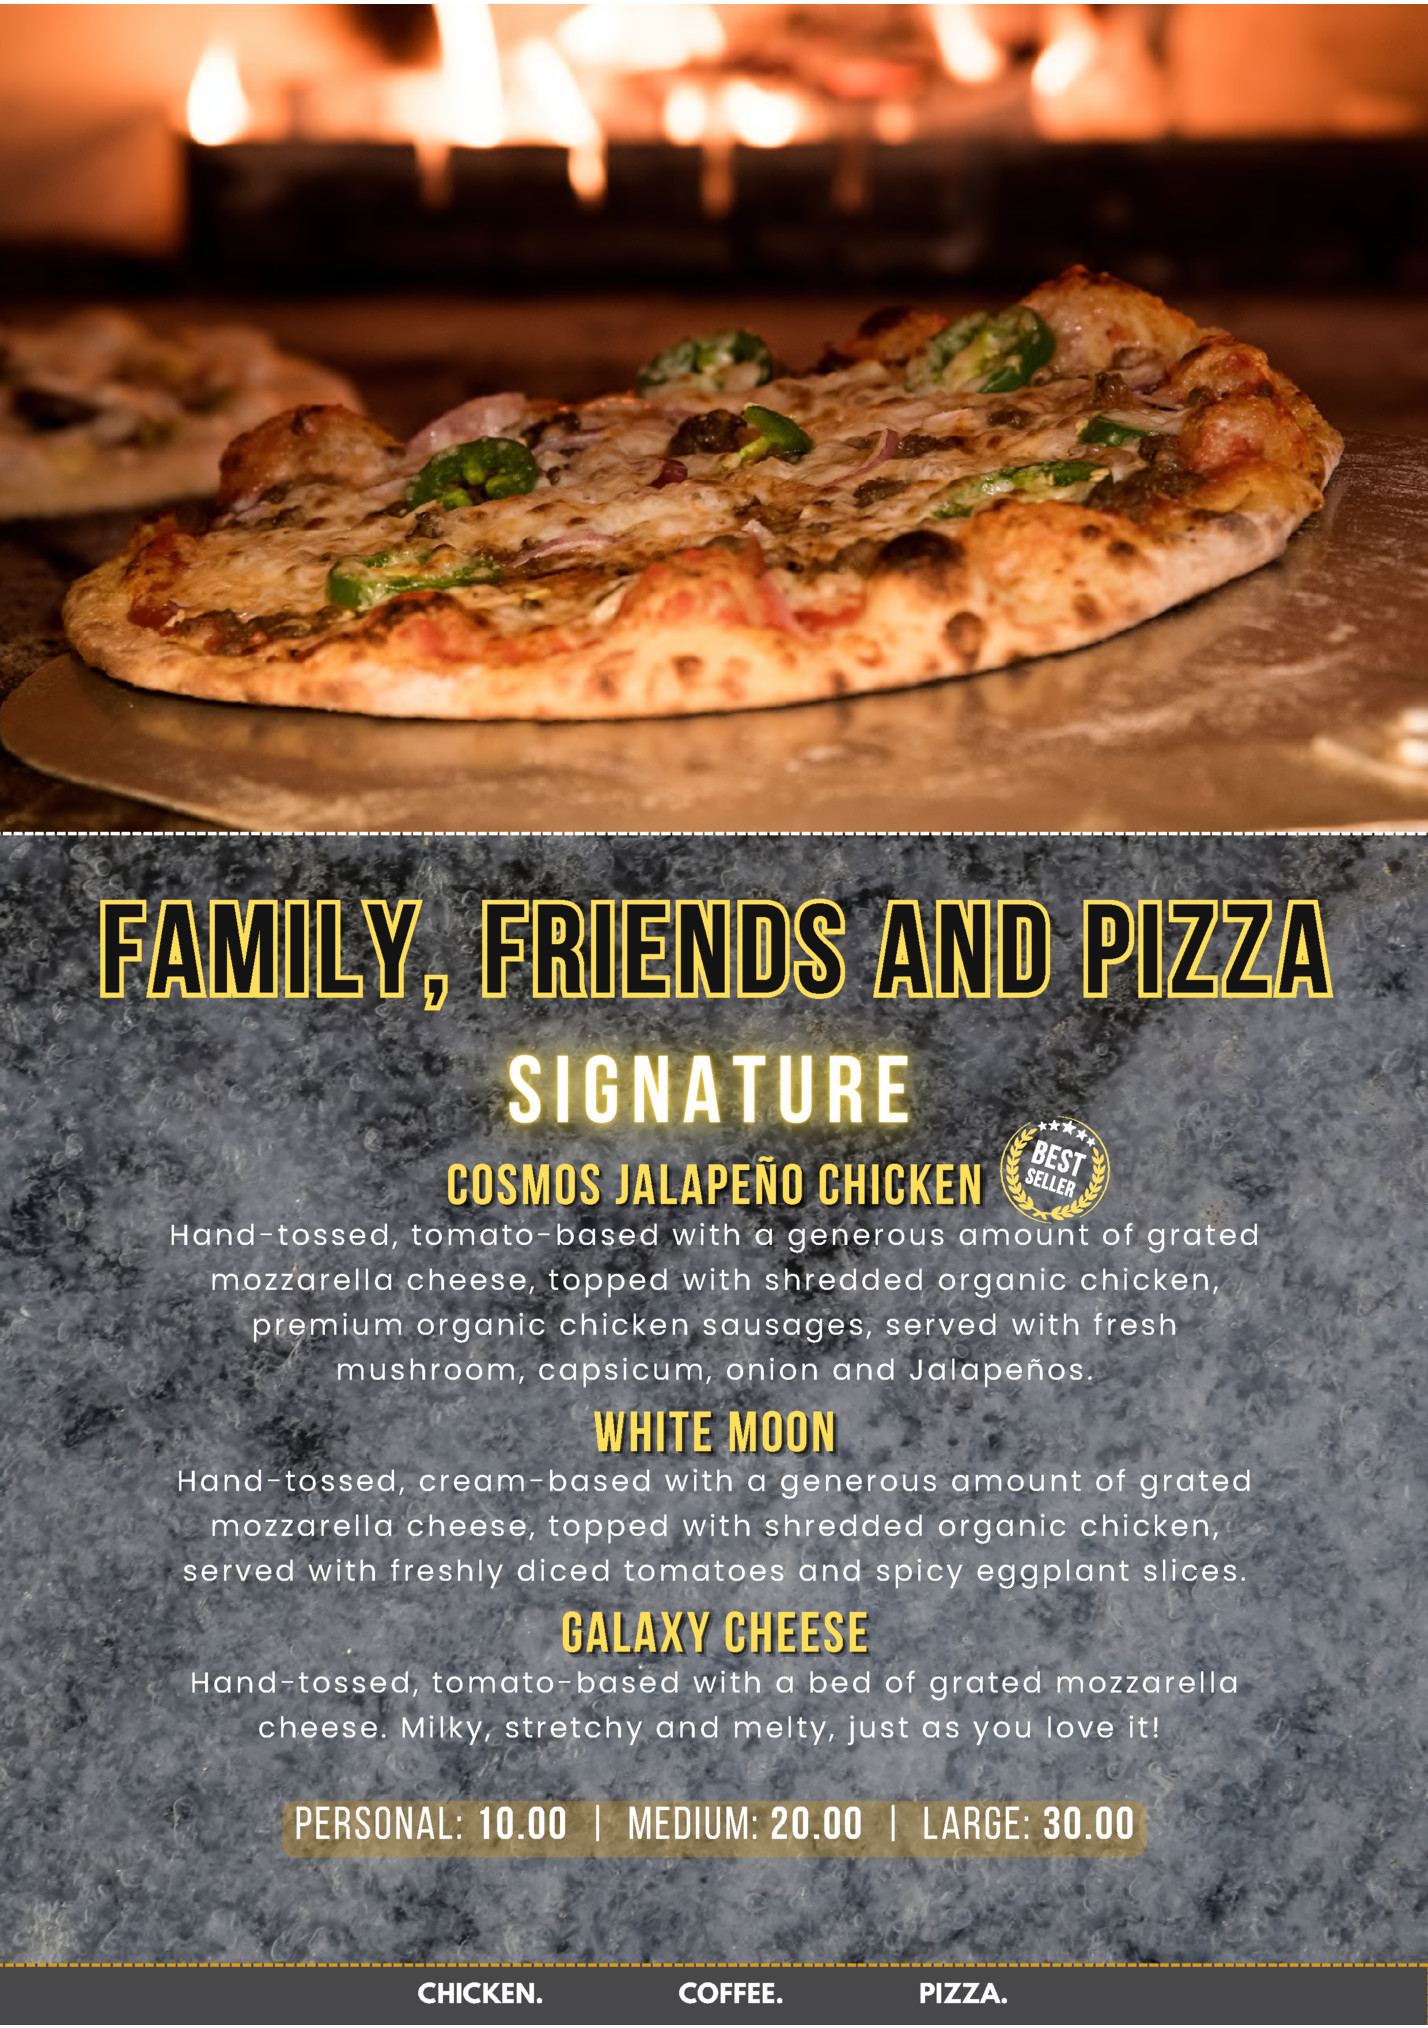 FAMILY, FRIENDS AND PIZZA